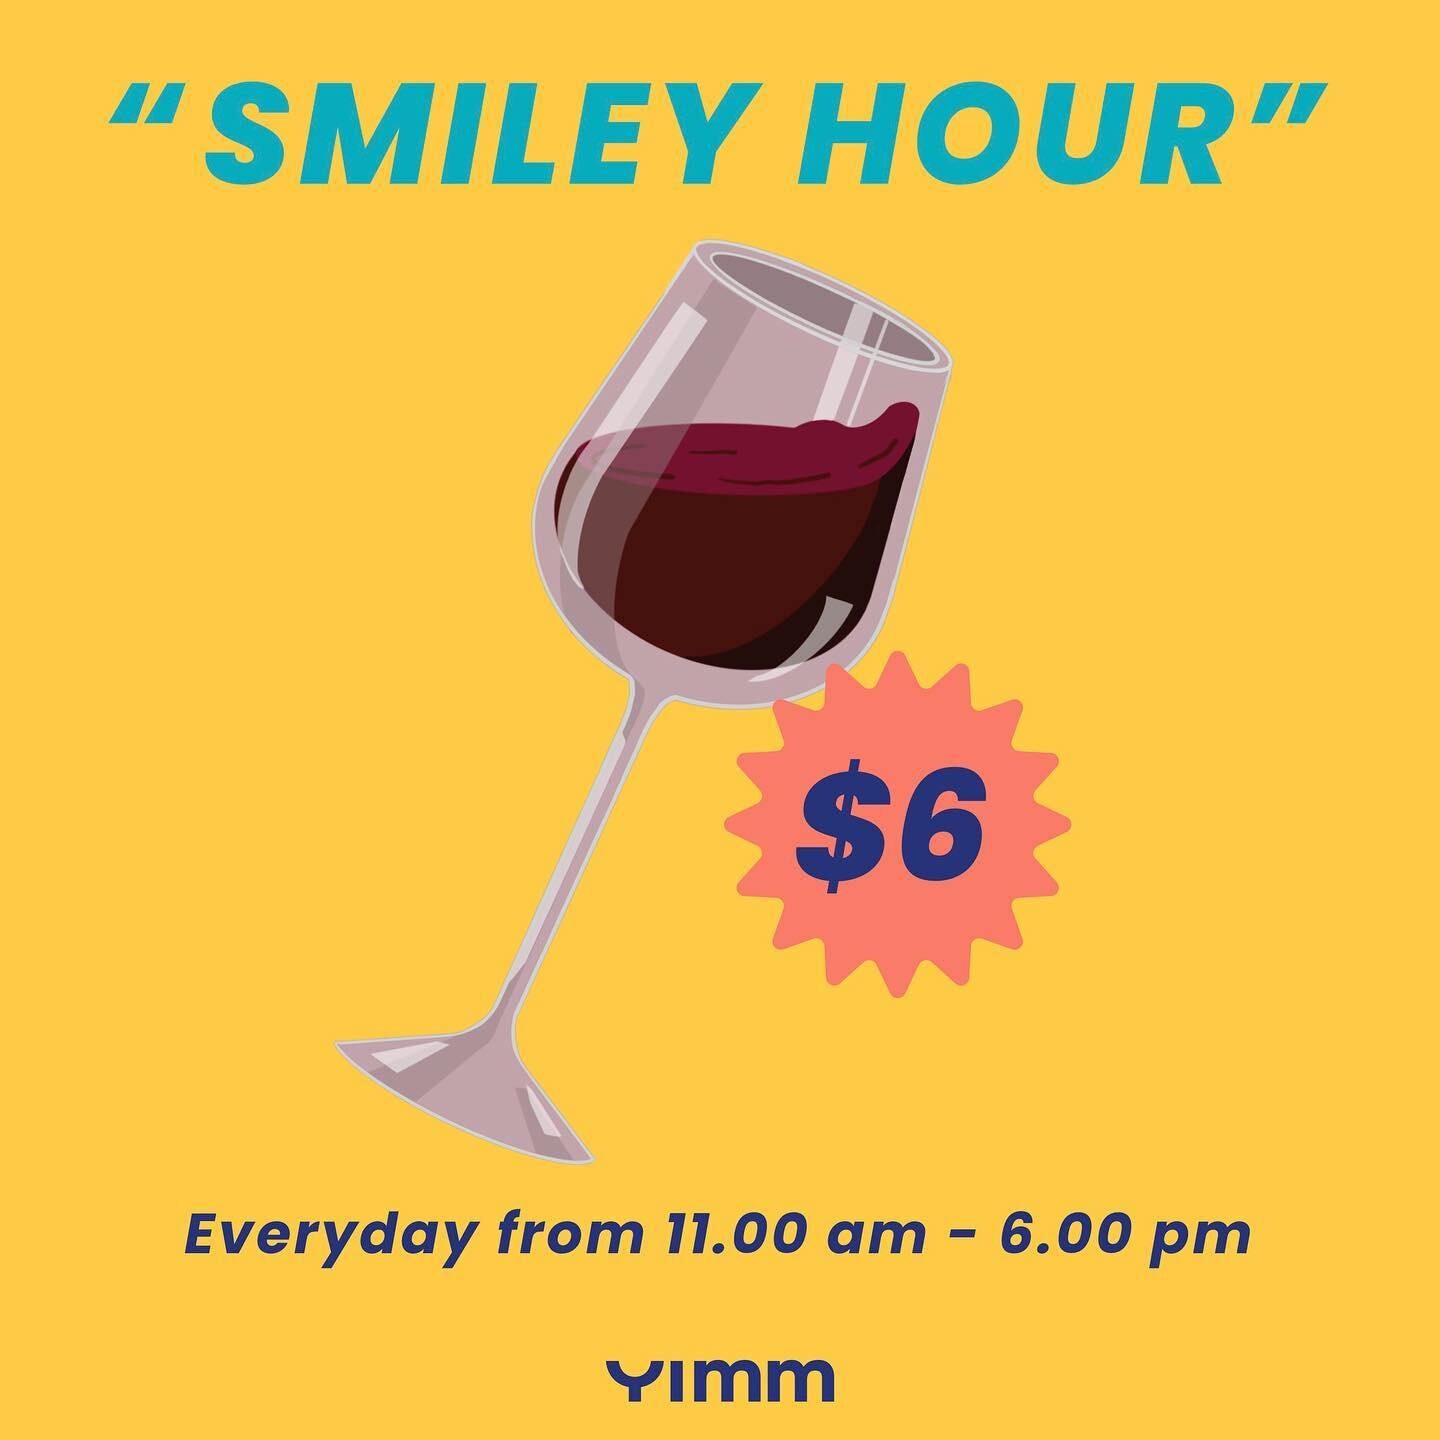 House Wine only $6 🍷 🤩 
Dine-in only 
Reservation call 510 250 9678
#yimmoakland #oakland #supportsmallbusiness #supportlocal #bayarea